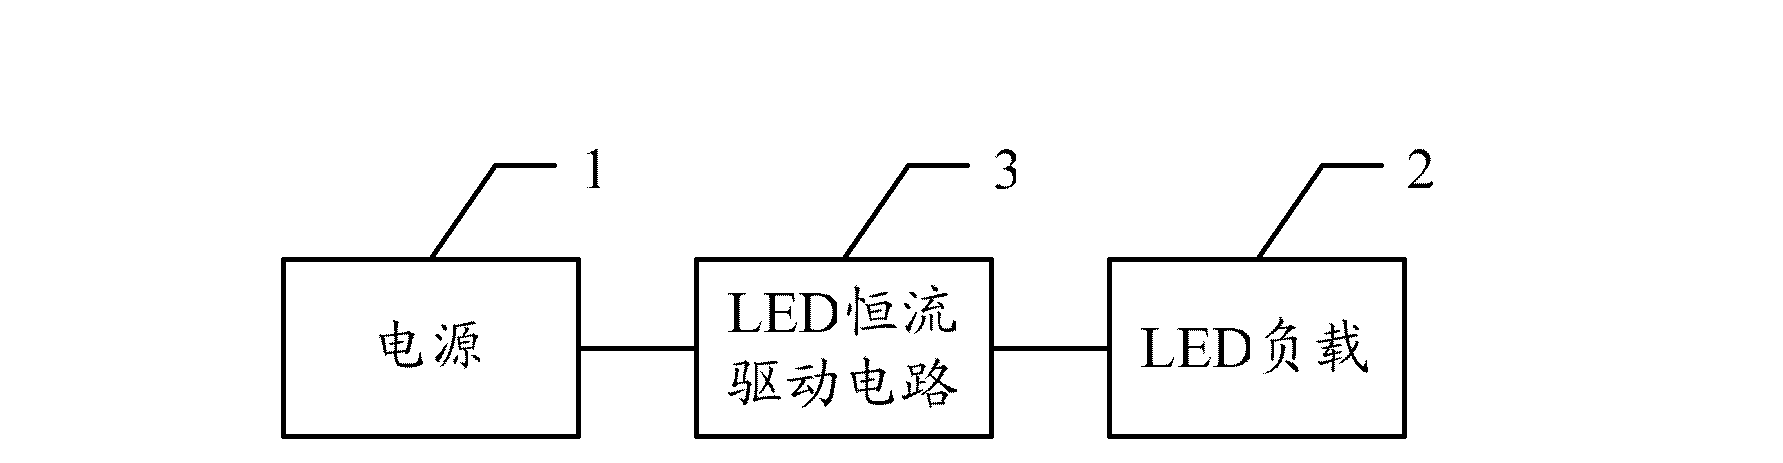 Light-emitting diode (LED) constant current drive circuit and LED lighting device